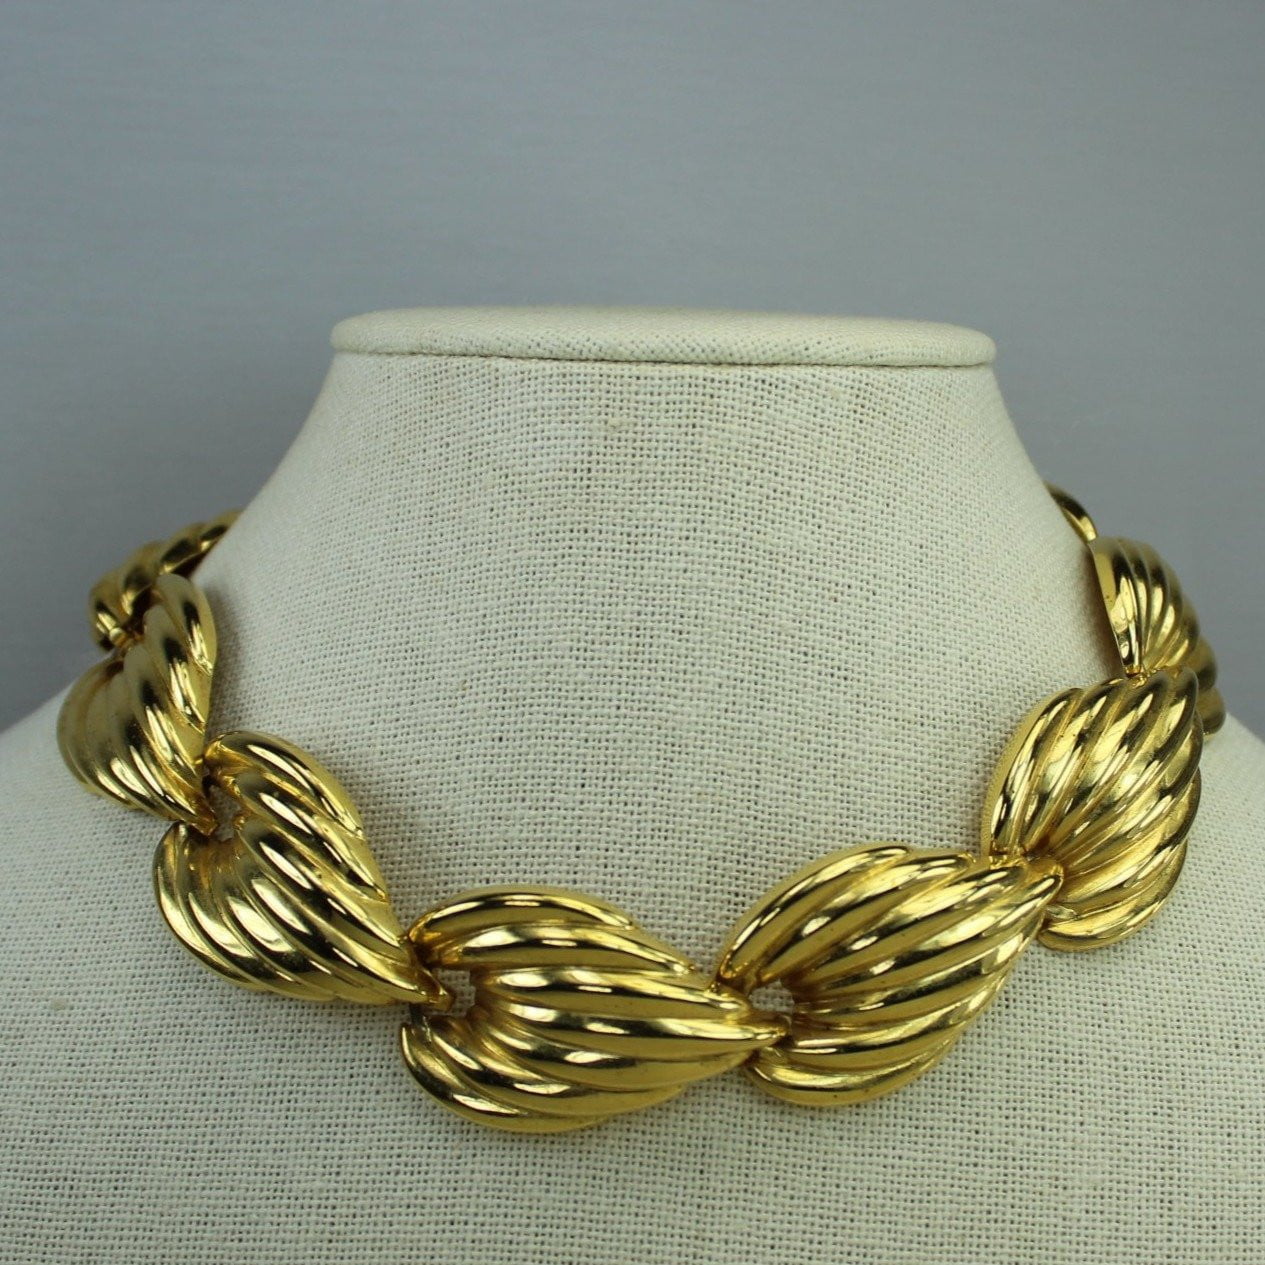 Classic Vintage Choker Gold Metal Leaves Necklace Large Showy Dimensional 1970s 60s